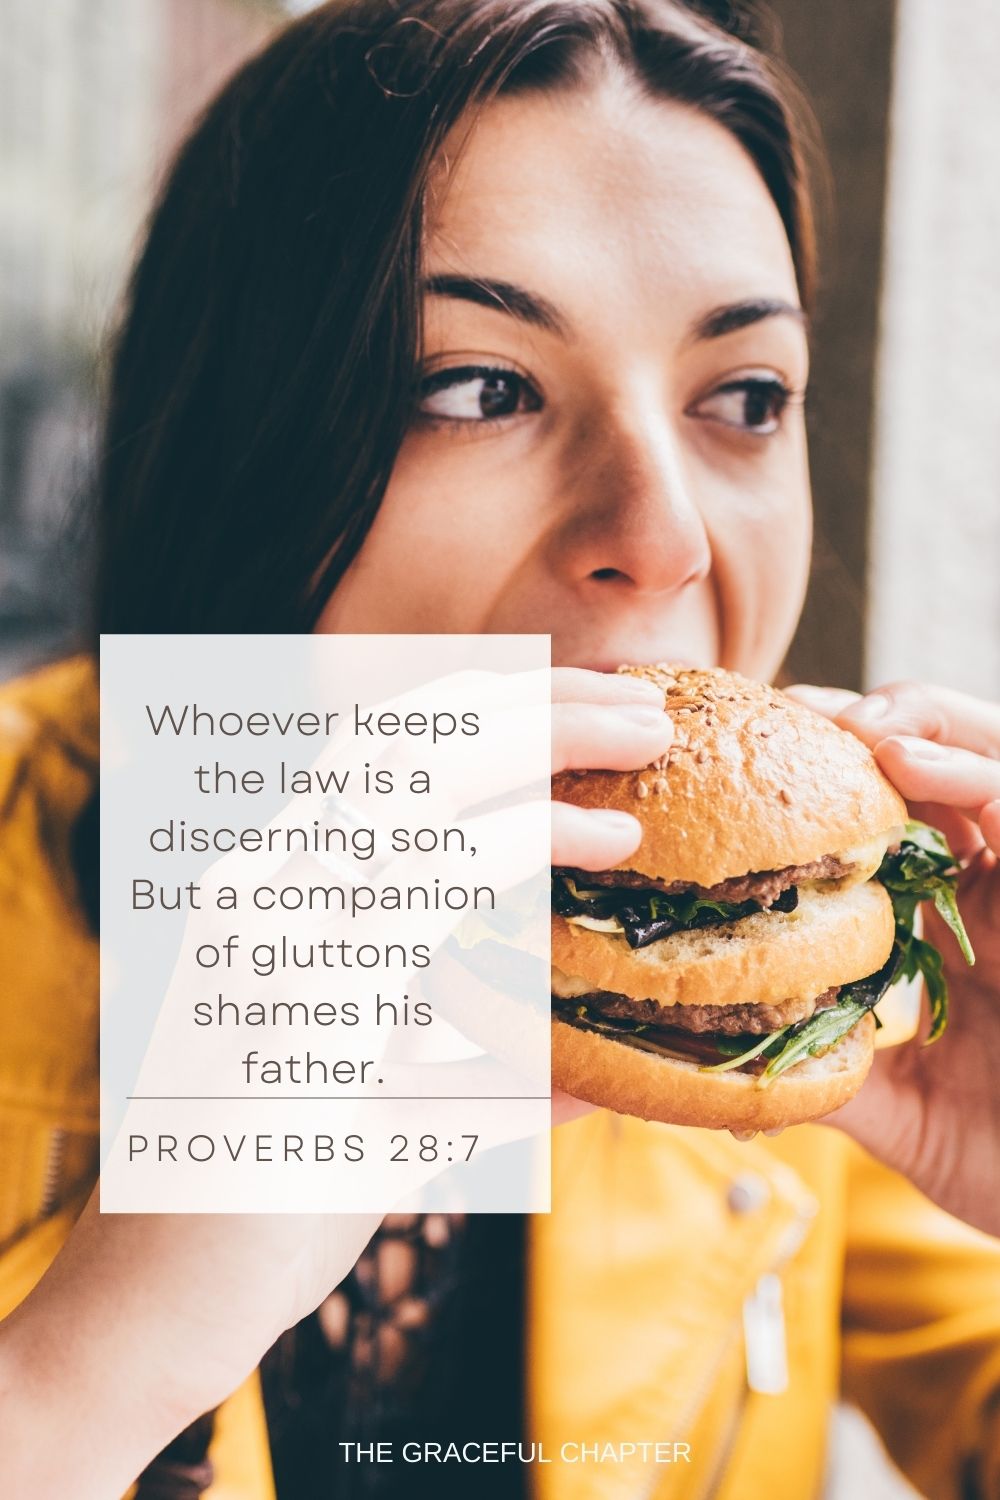 Whoever keeps the law is a discerning son, But a companion of gluttons shames his father. Proverbs 28:7